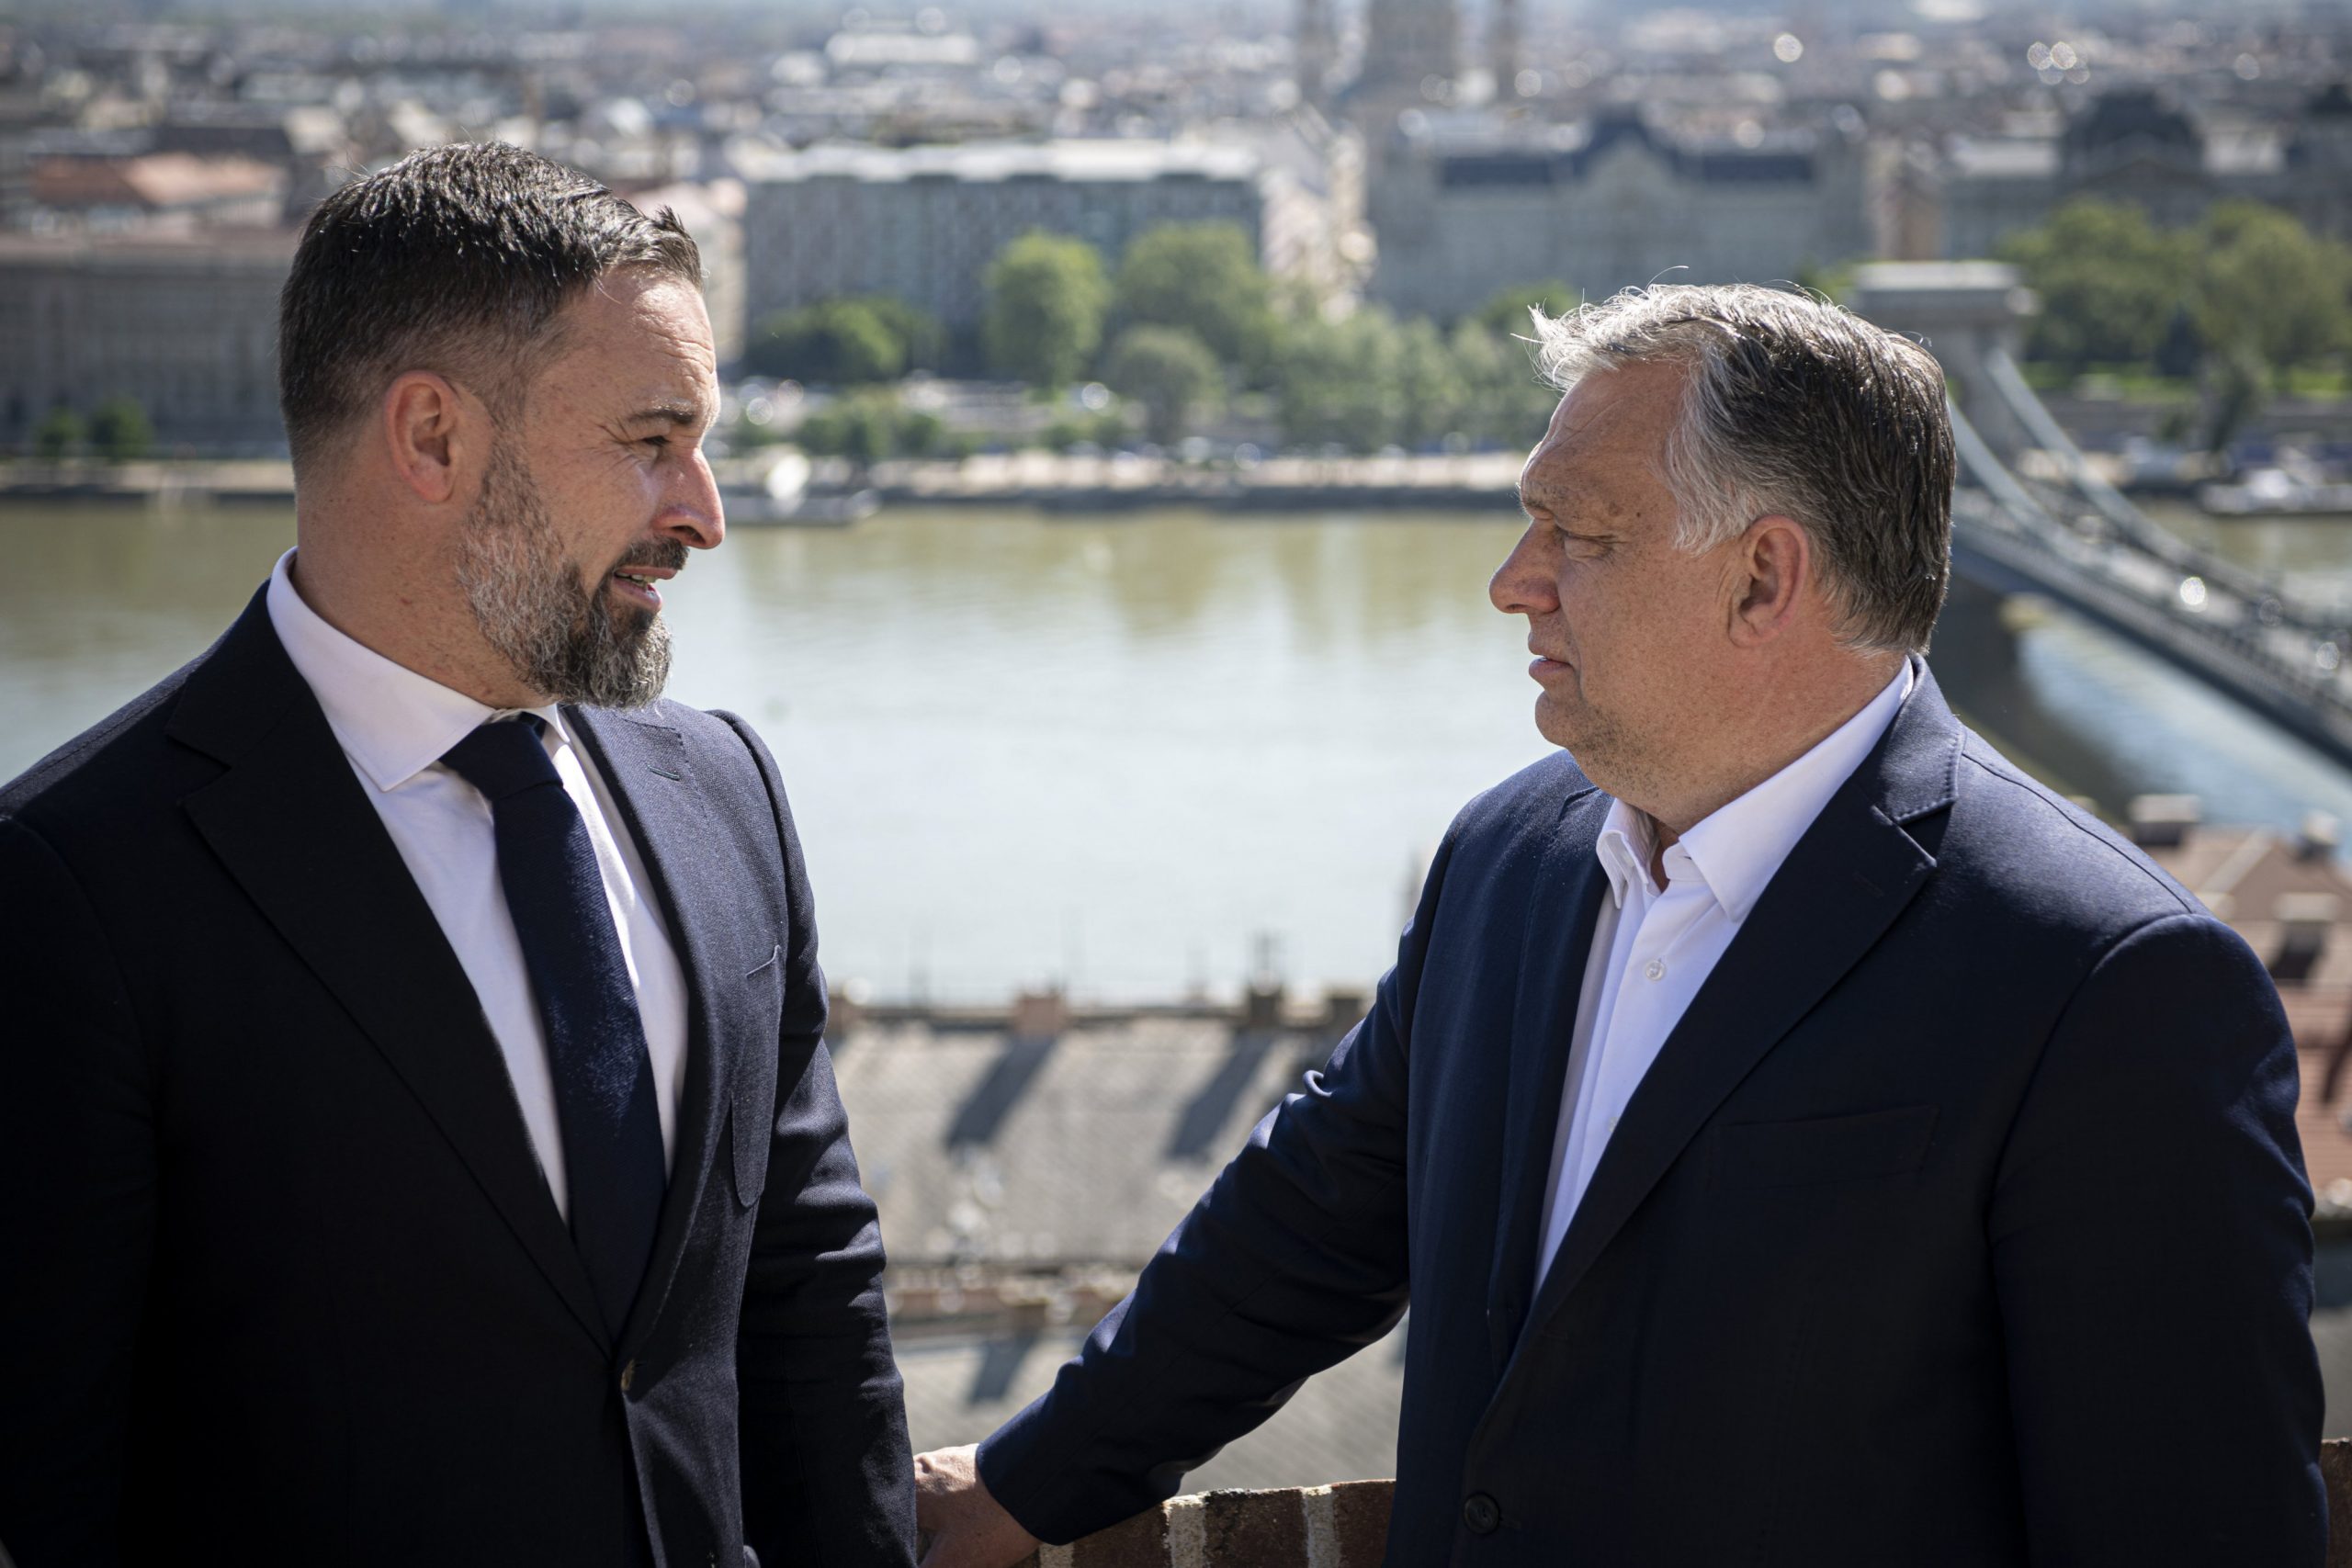 Viktor Orbán Wishes Success to Spain's VOX Party